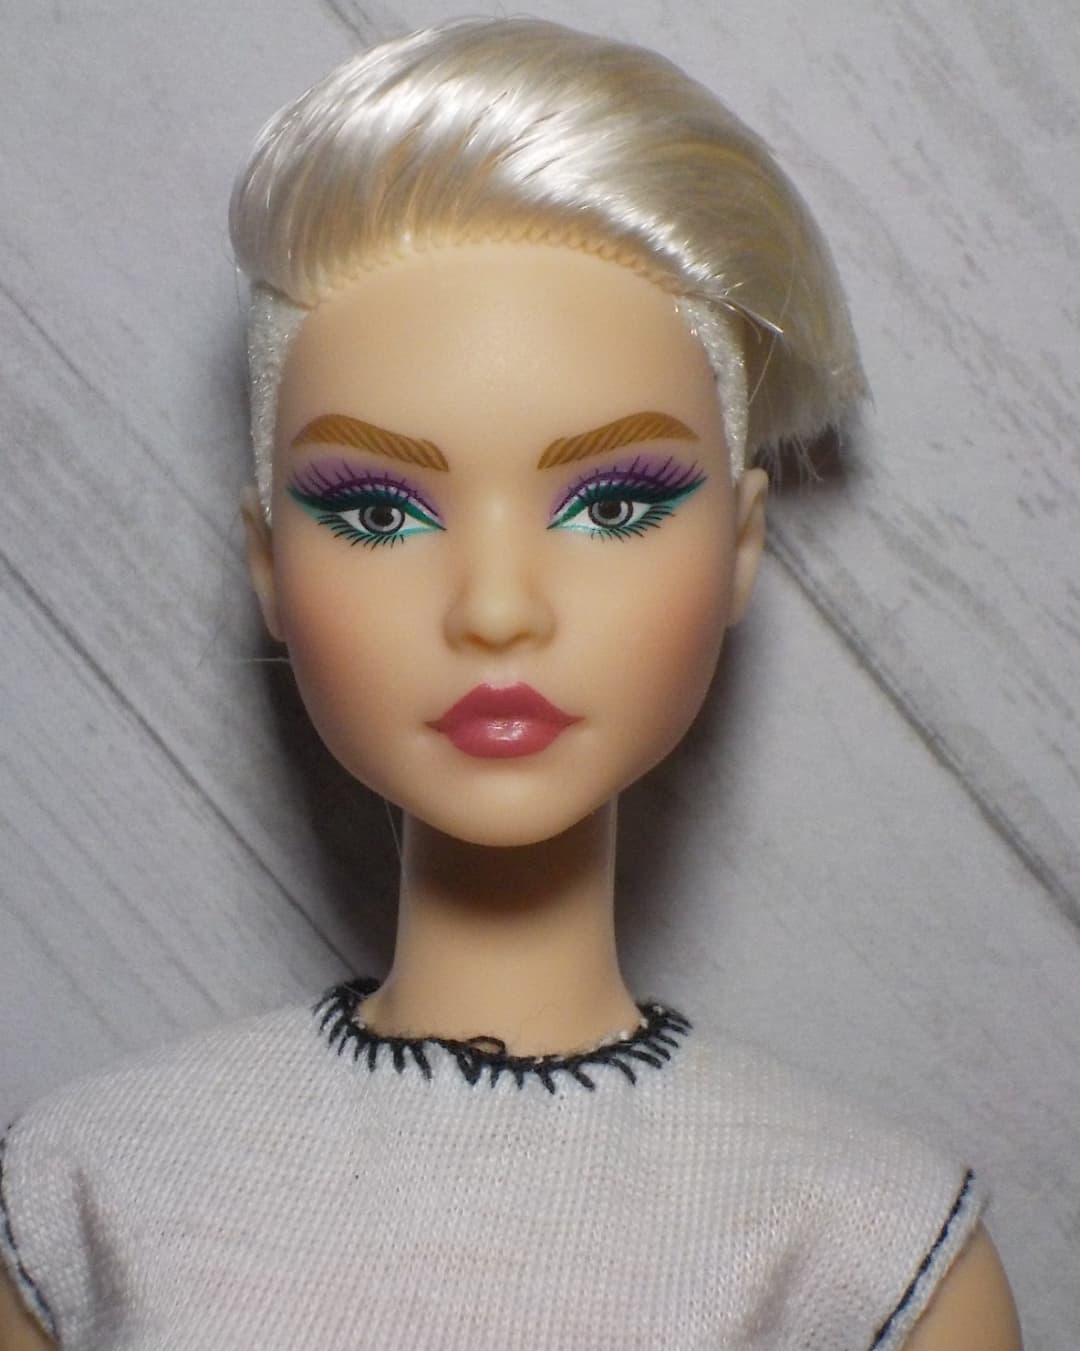 CapCut says this is my look as a #Gucci Barbie Doll 👑QUEEN👑'2023